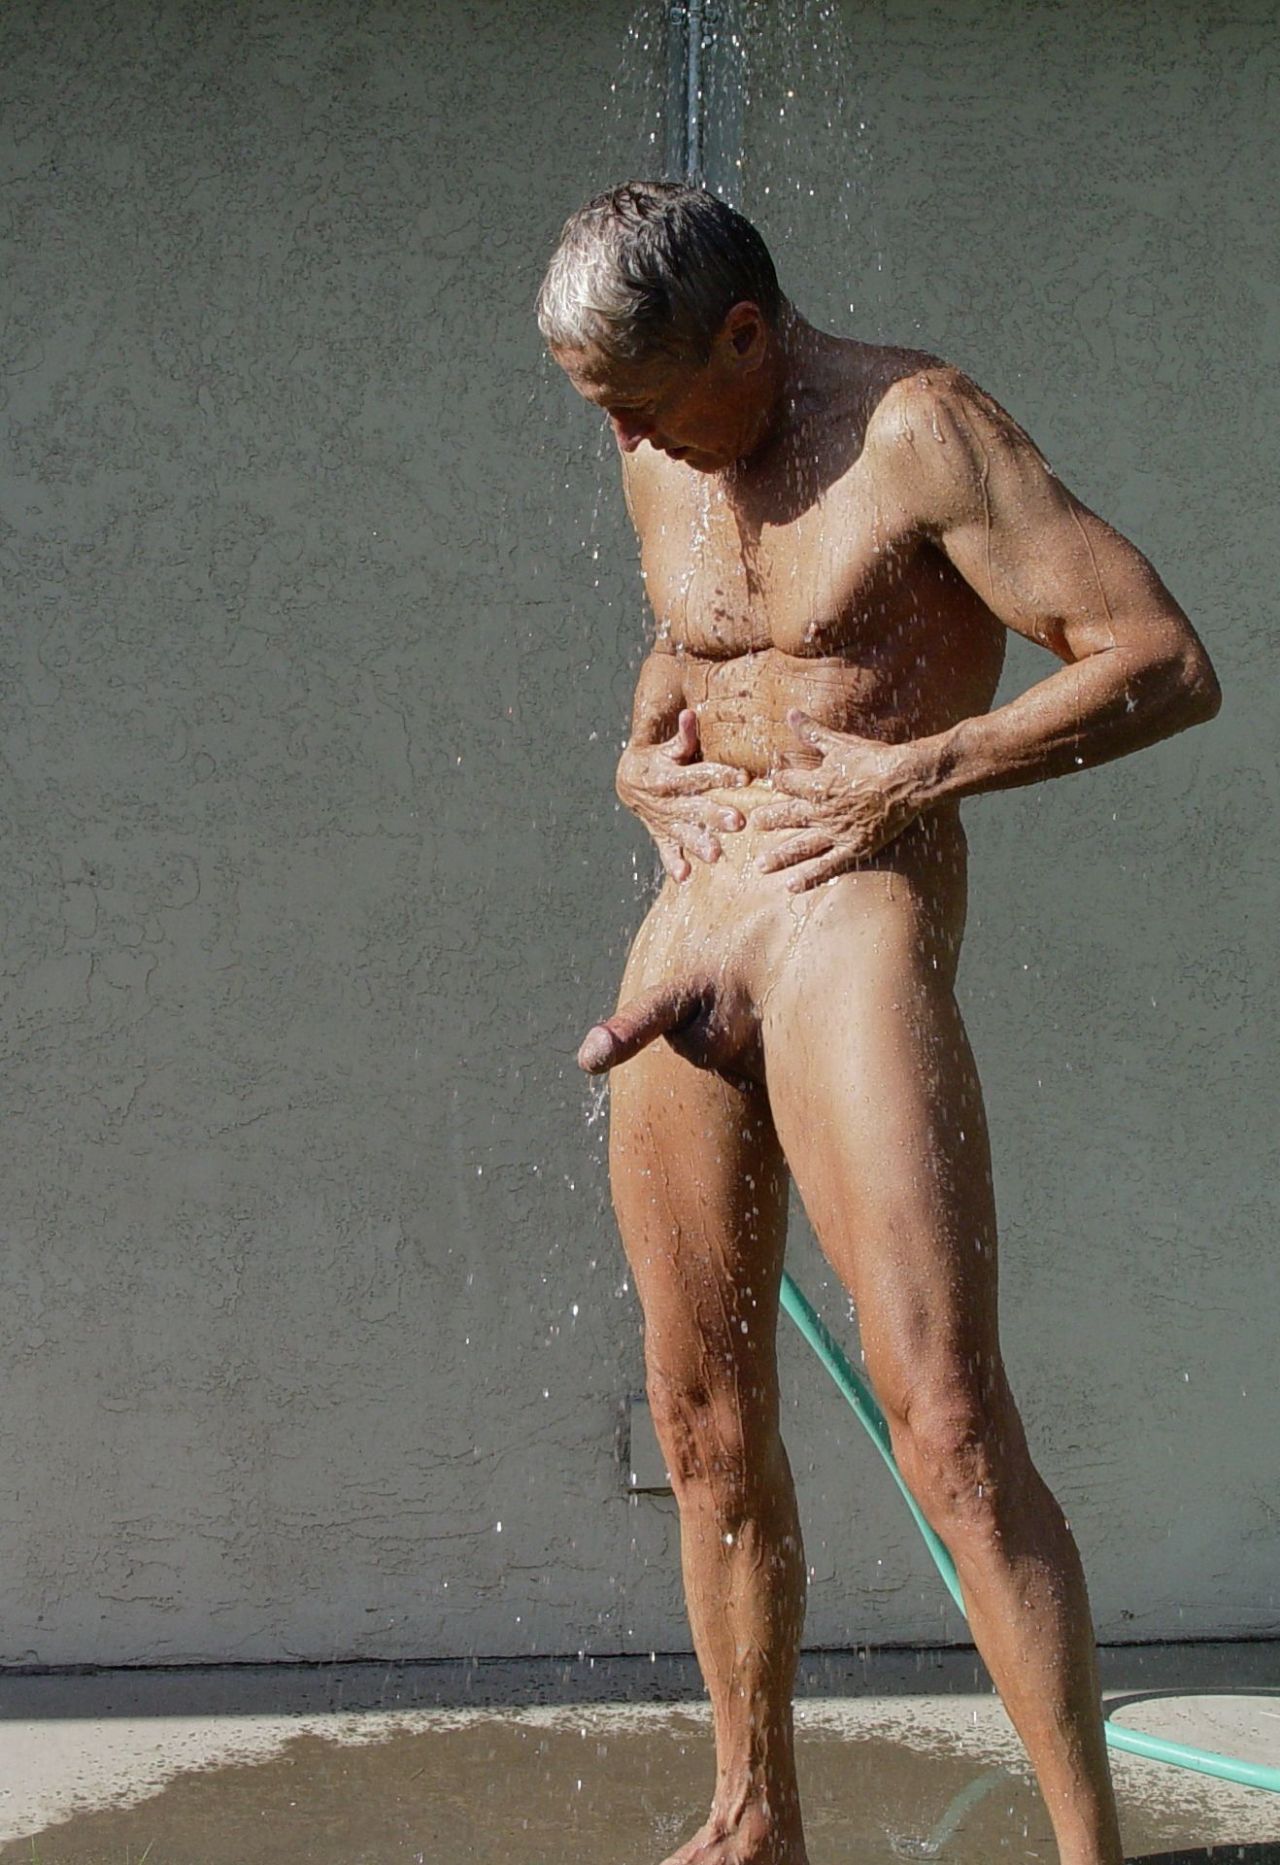 mountainvalleynudism:
“ Love Outdoor Showers———
”